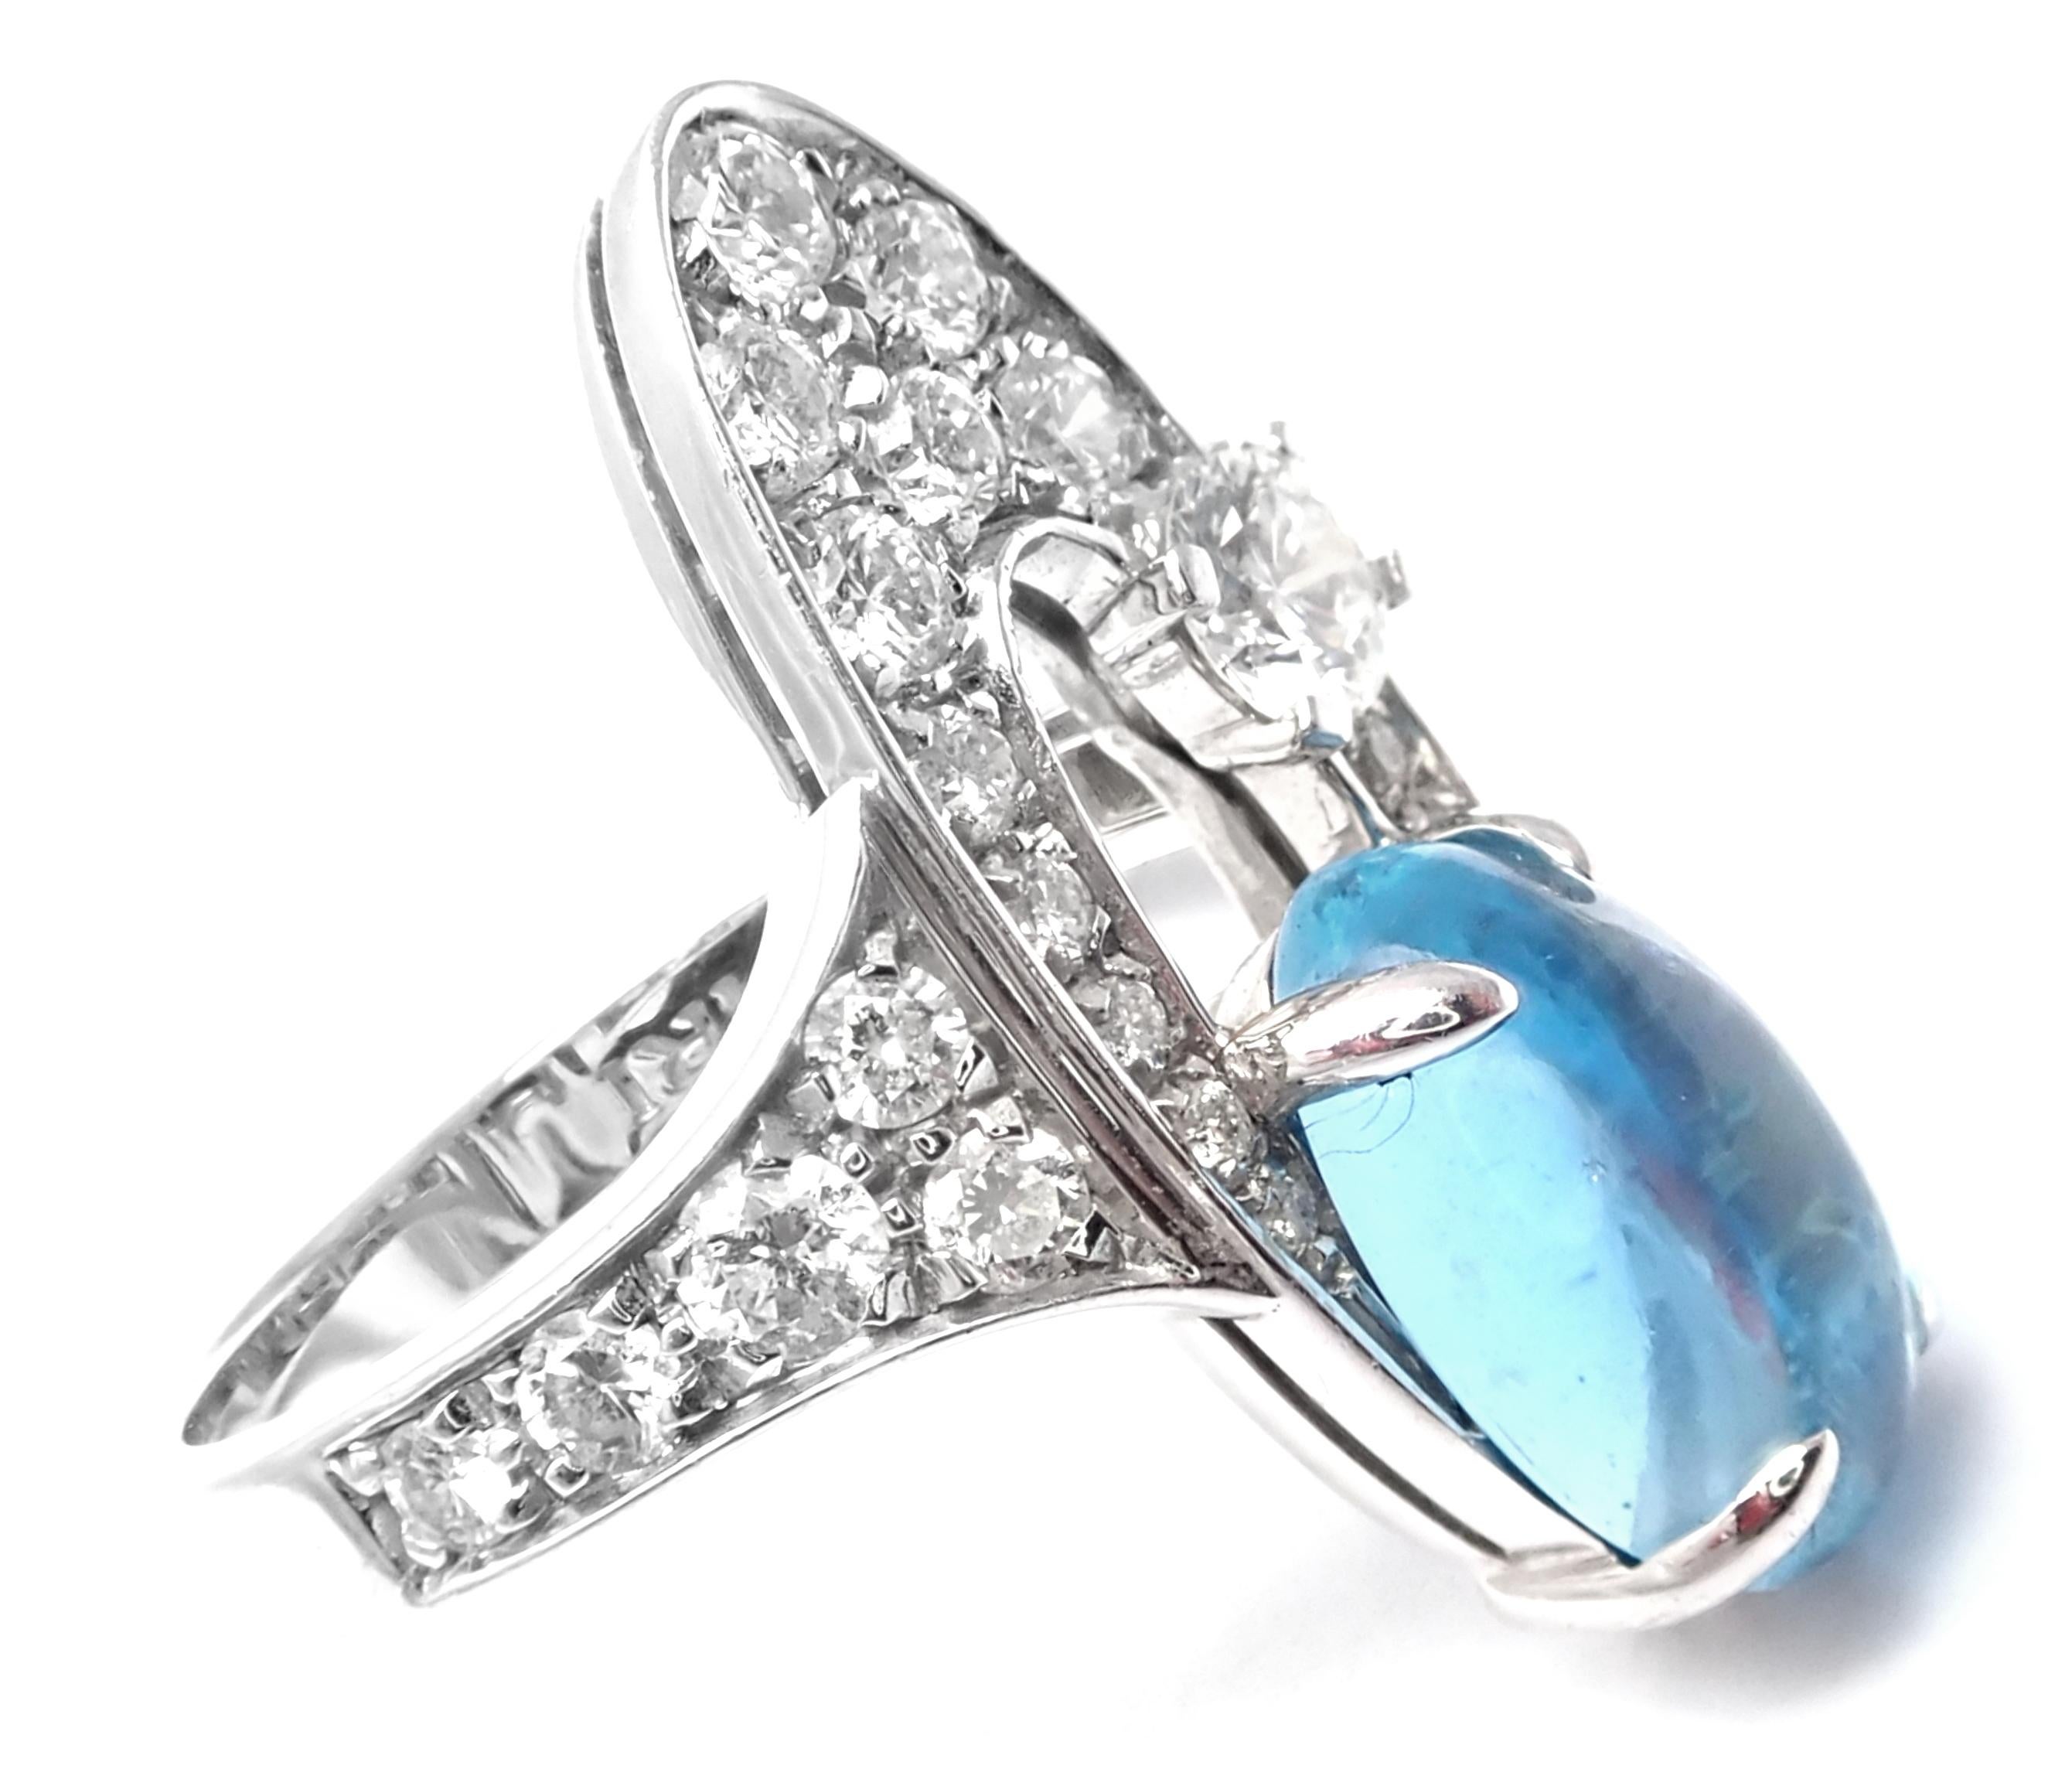 18k White Gold Diamond Blue Topaz Elysia Ring by Bulgari. 
With 23 round brilliant cut diamonds VS1 clarity, G color total weight approximately .75ct
1 oval blue topaz 10.7mm x 6.7mm
Details:
Ring Size: 6.25 (resizing is available)
Weight: 6
Width: